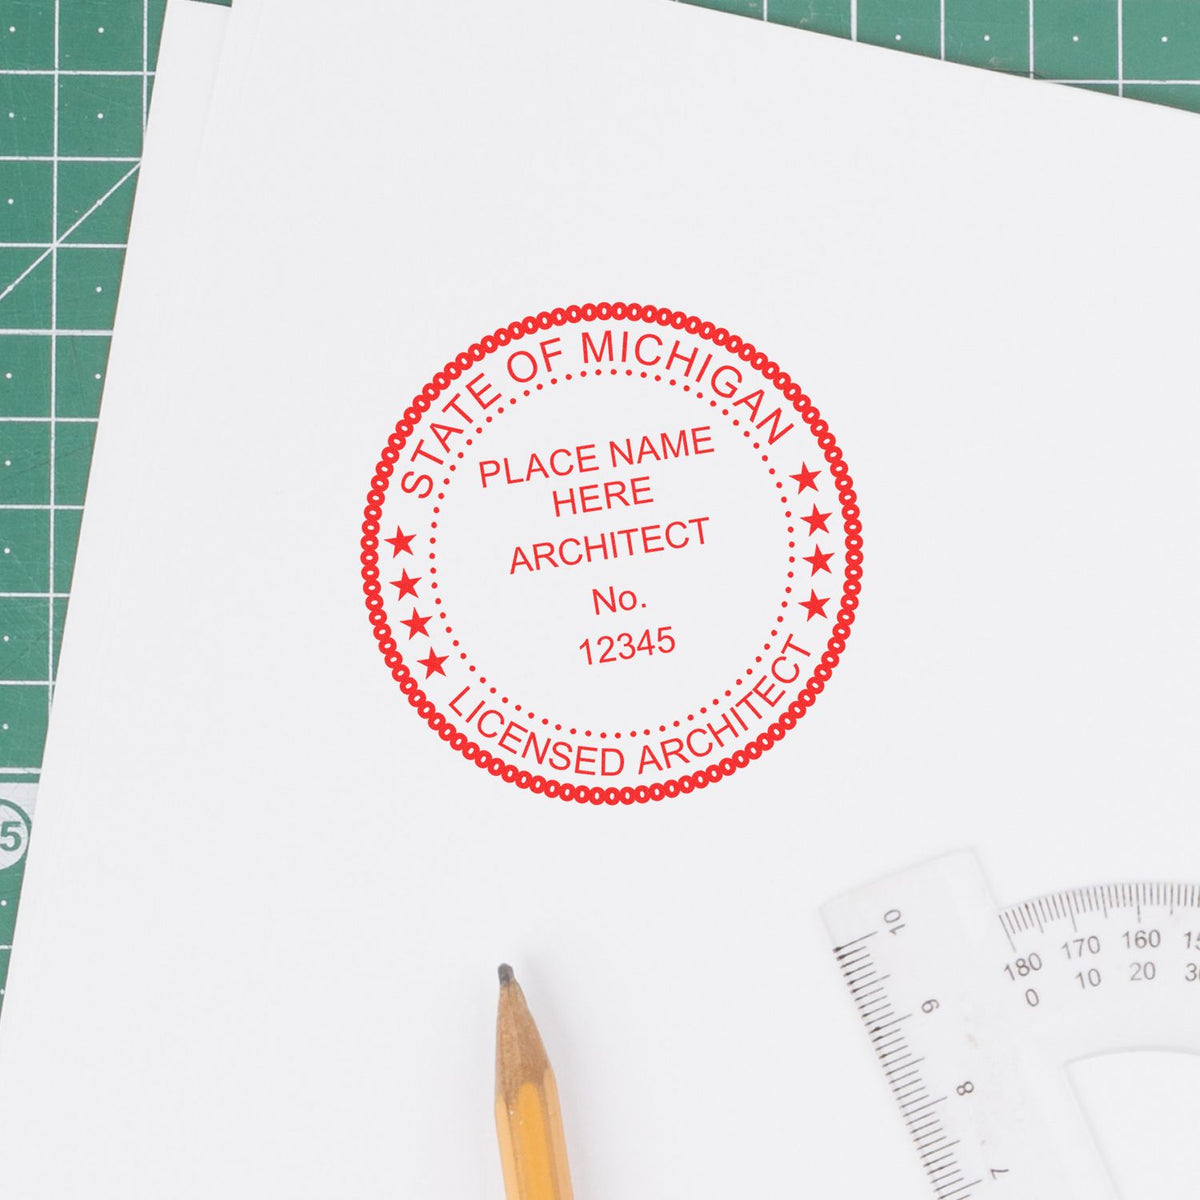 The Slim Pre-Inked Michigan Architect Seal Stamp stamp impression comes to life with a crisp, detailed photo on paper - showcasing true professional quality.